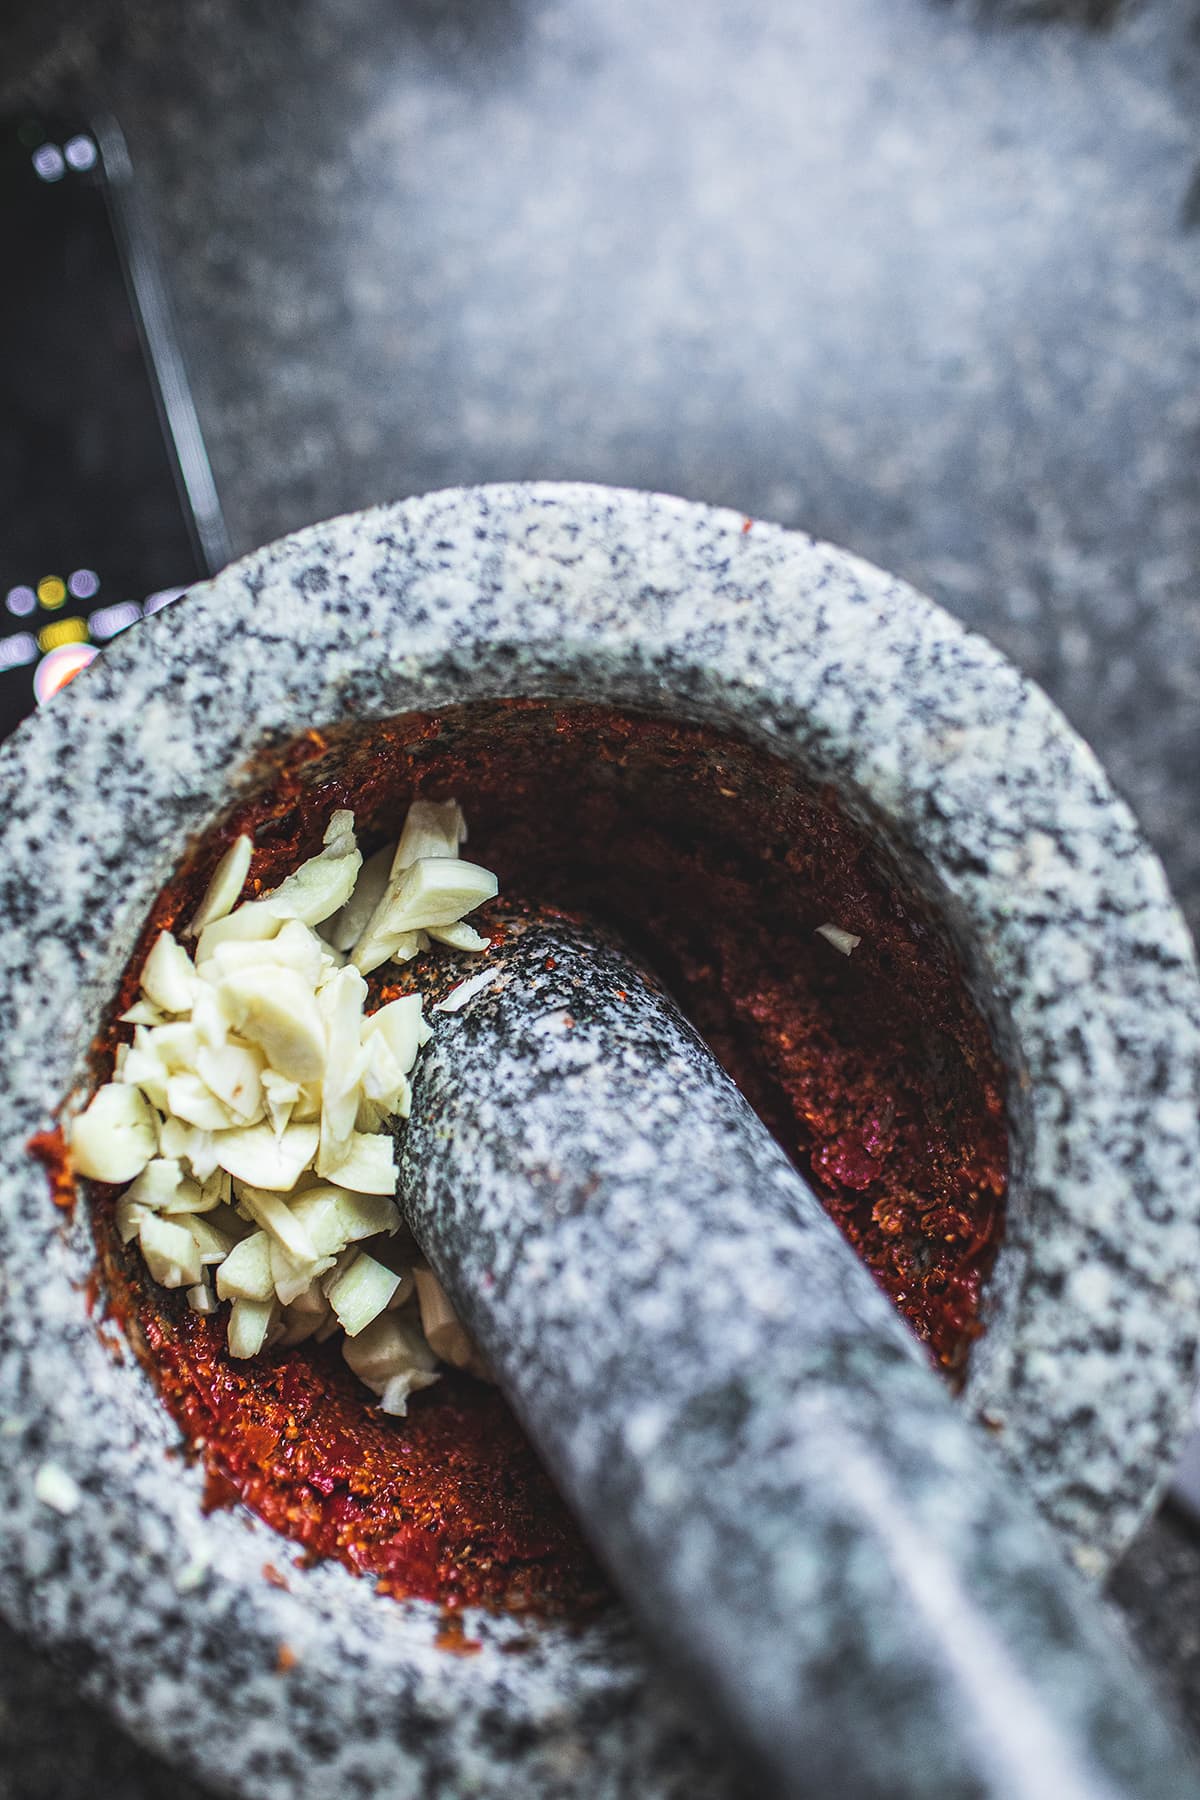 Prik Khing Thai curry paste in a mortar and pestle with chopped garlic.